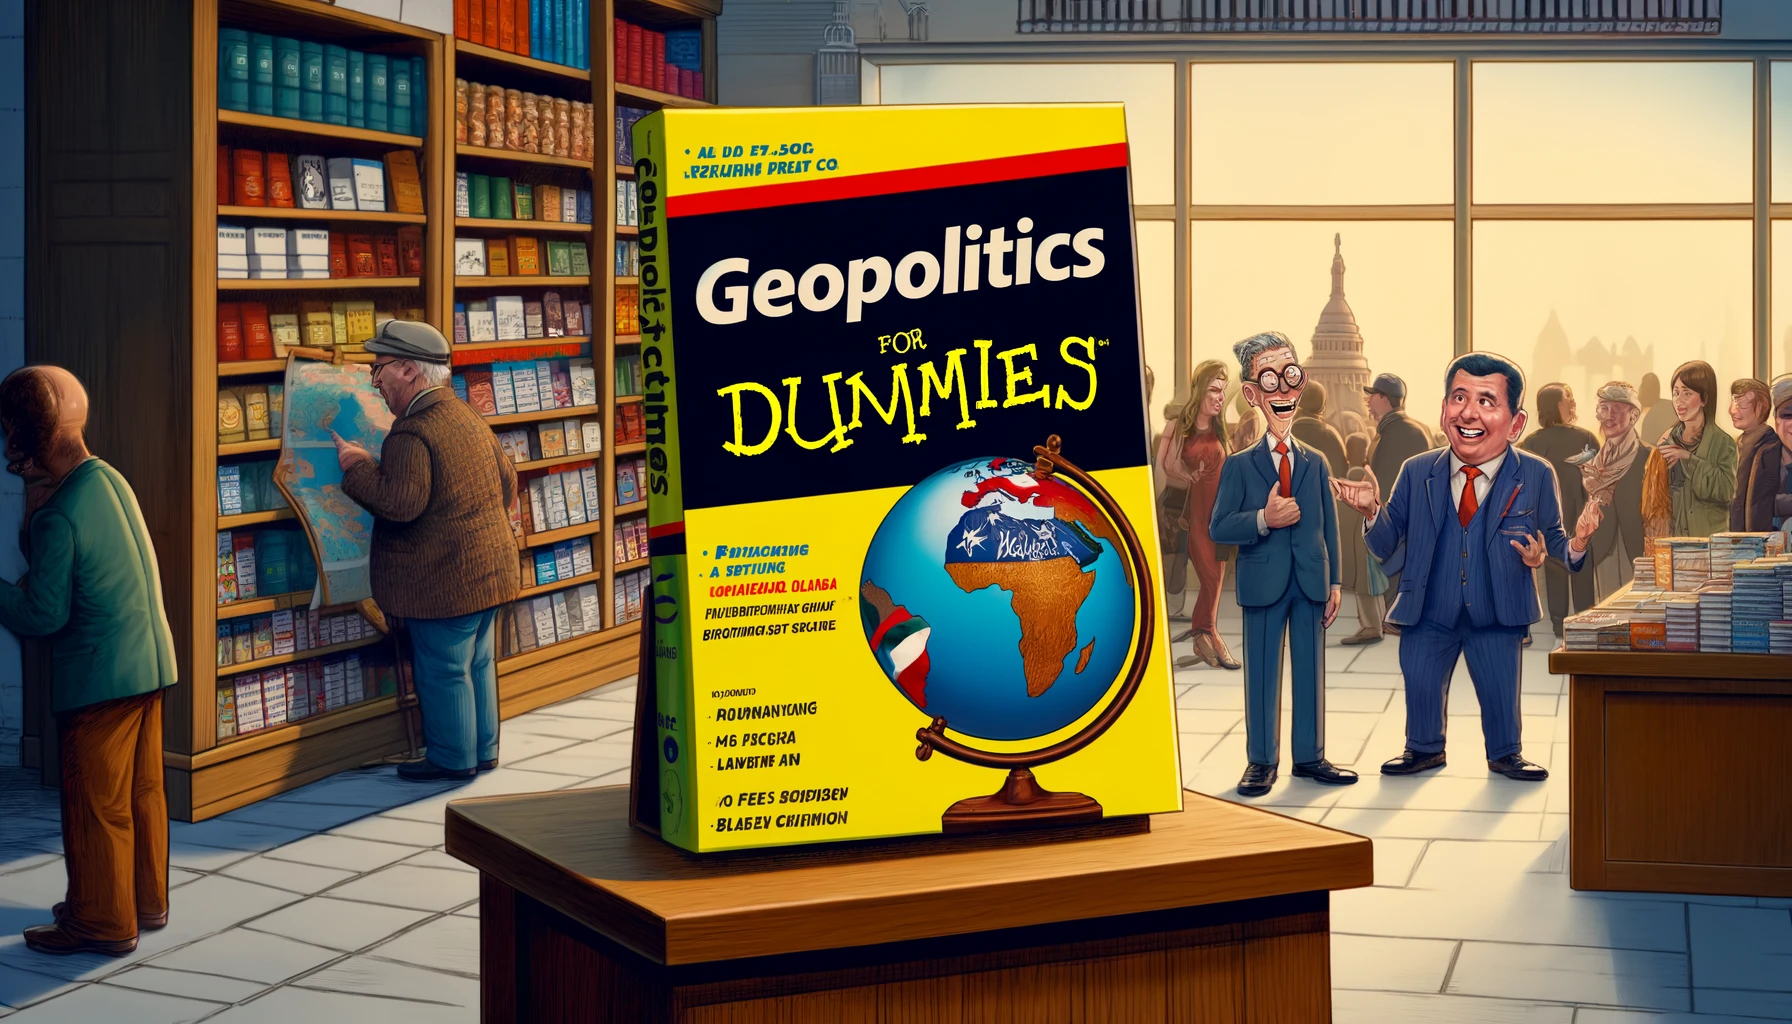 geopolitics-for-dummies-sellout-mexico-not-near-africa-csdn